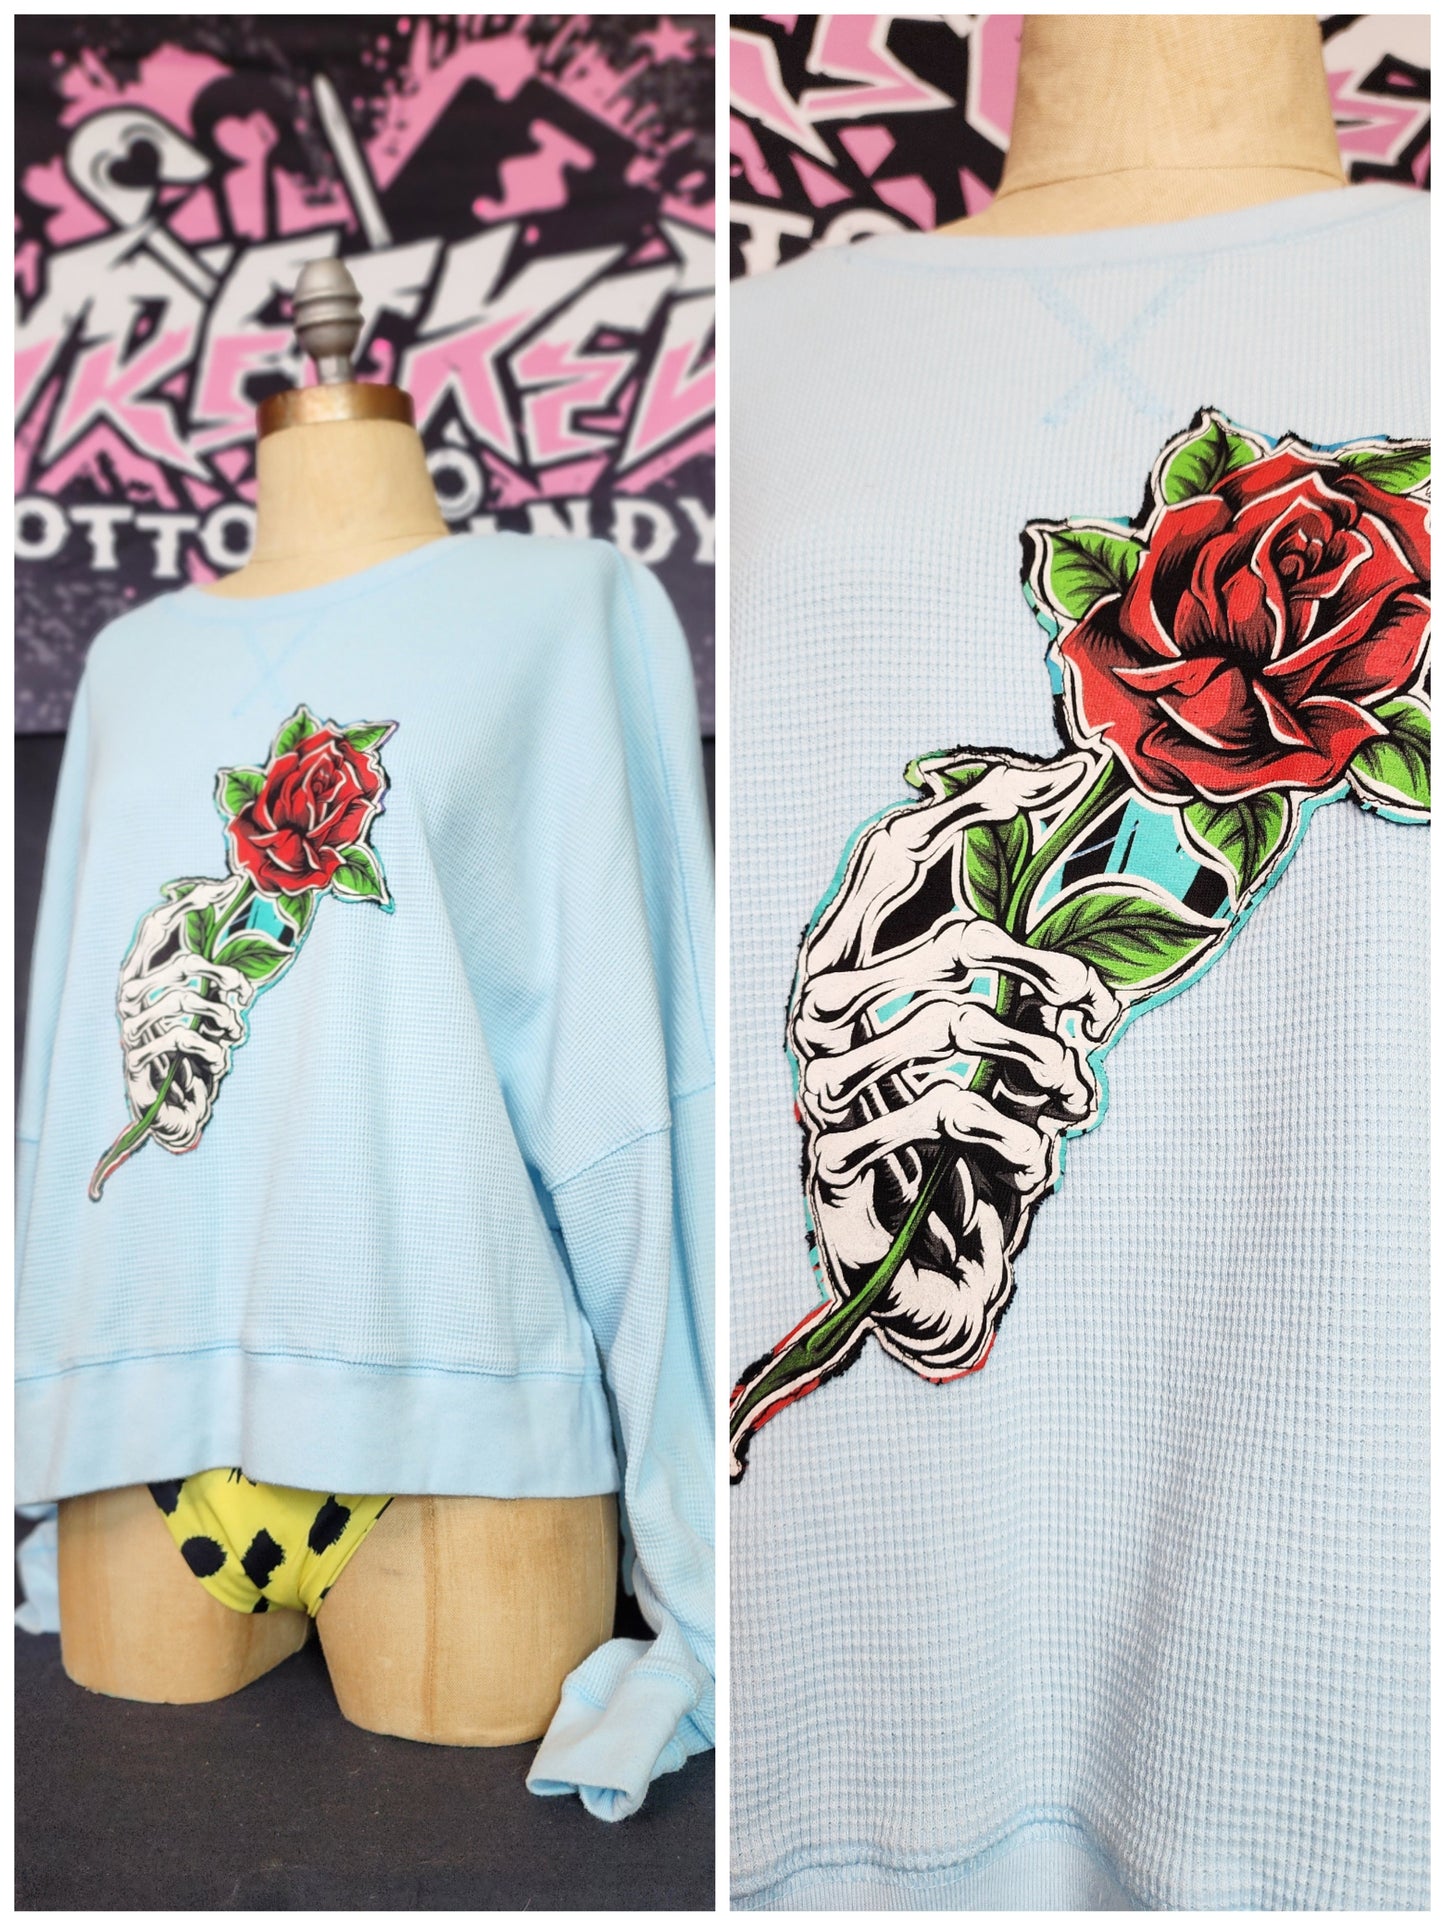 Skelli Hand with Rose Thermal Shirt